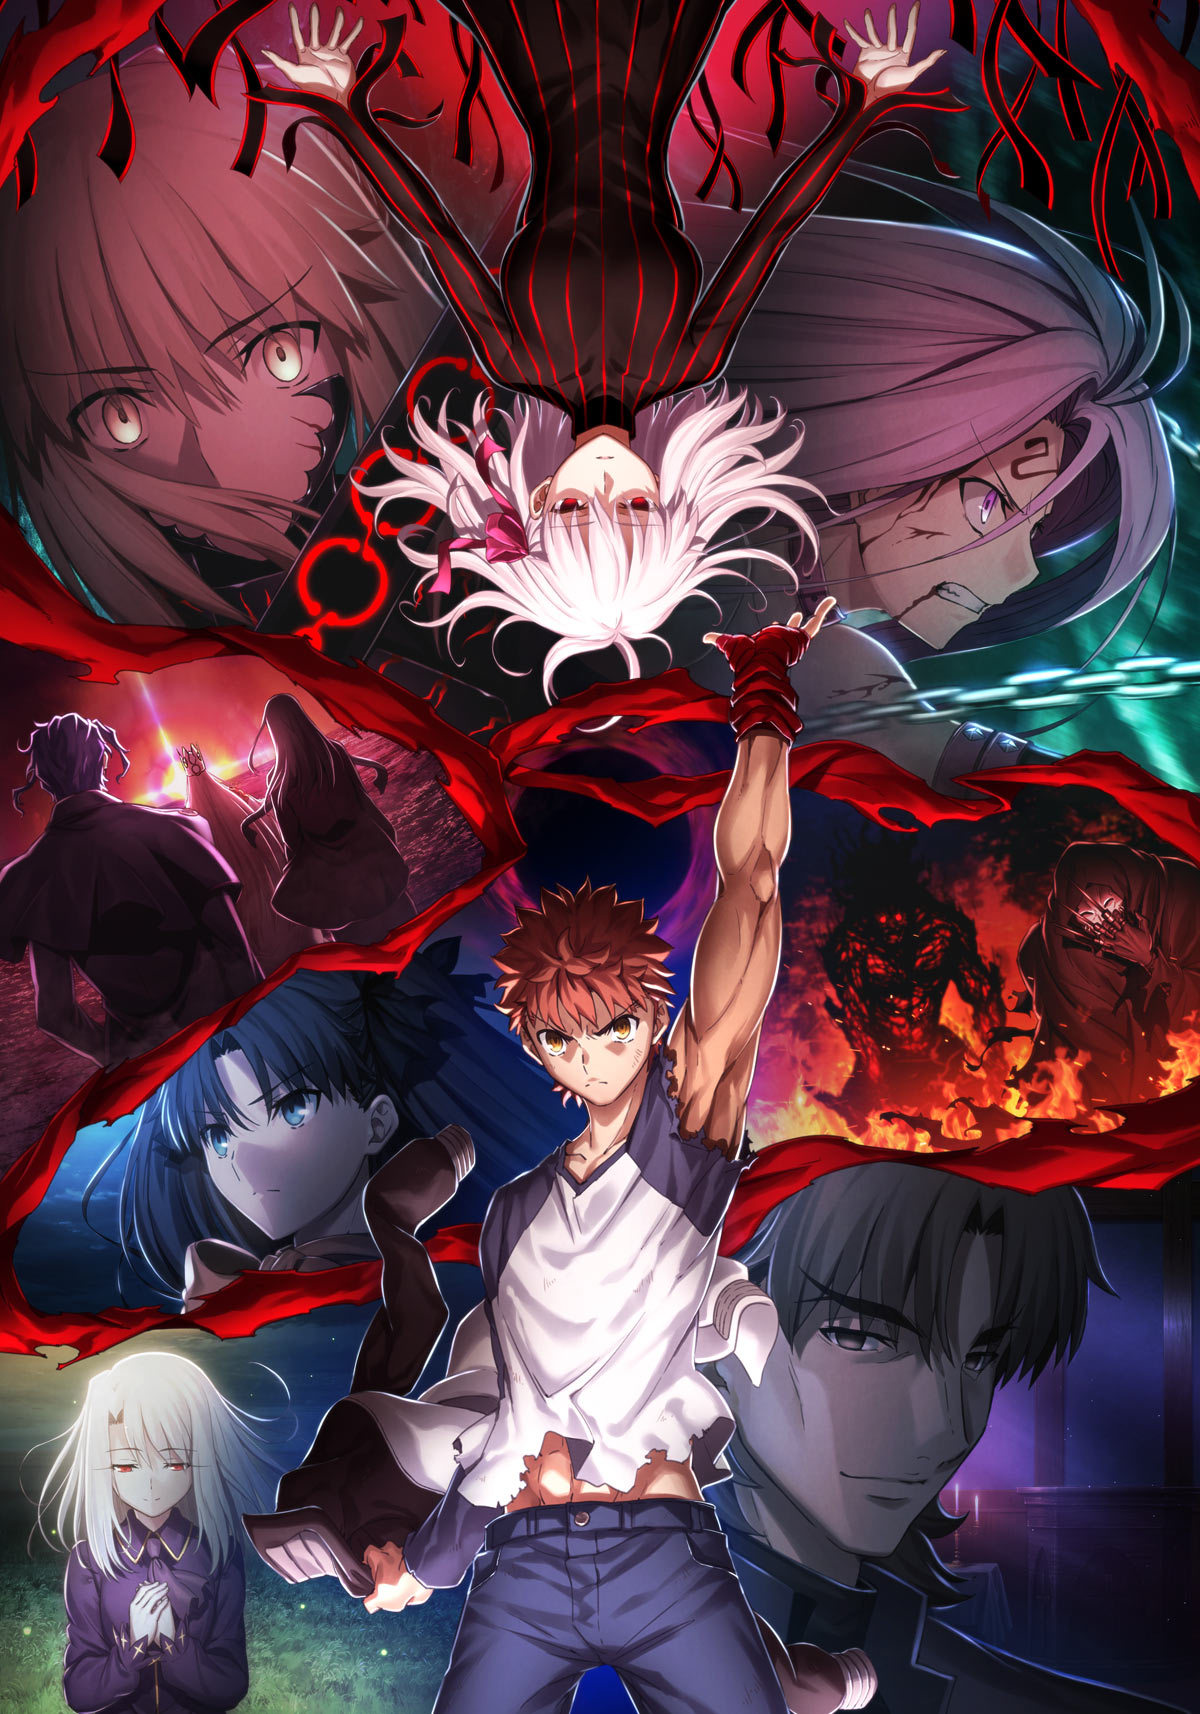 A second poster visual for the “Fate/stay night: Heaven’s Feel III - Spring Song” anime film has been unveiled. It’ll open in Japanese theaters in Spring 2020.